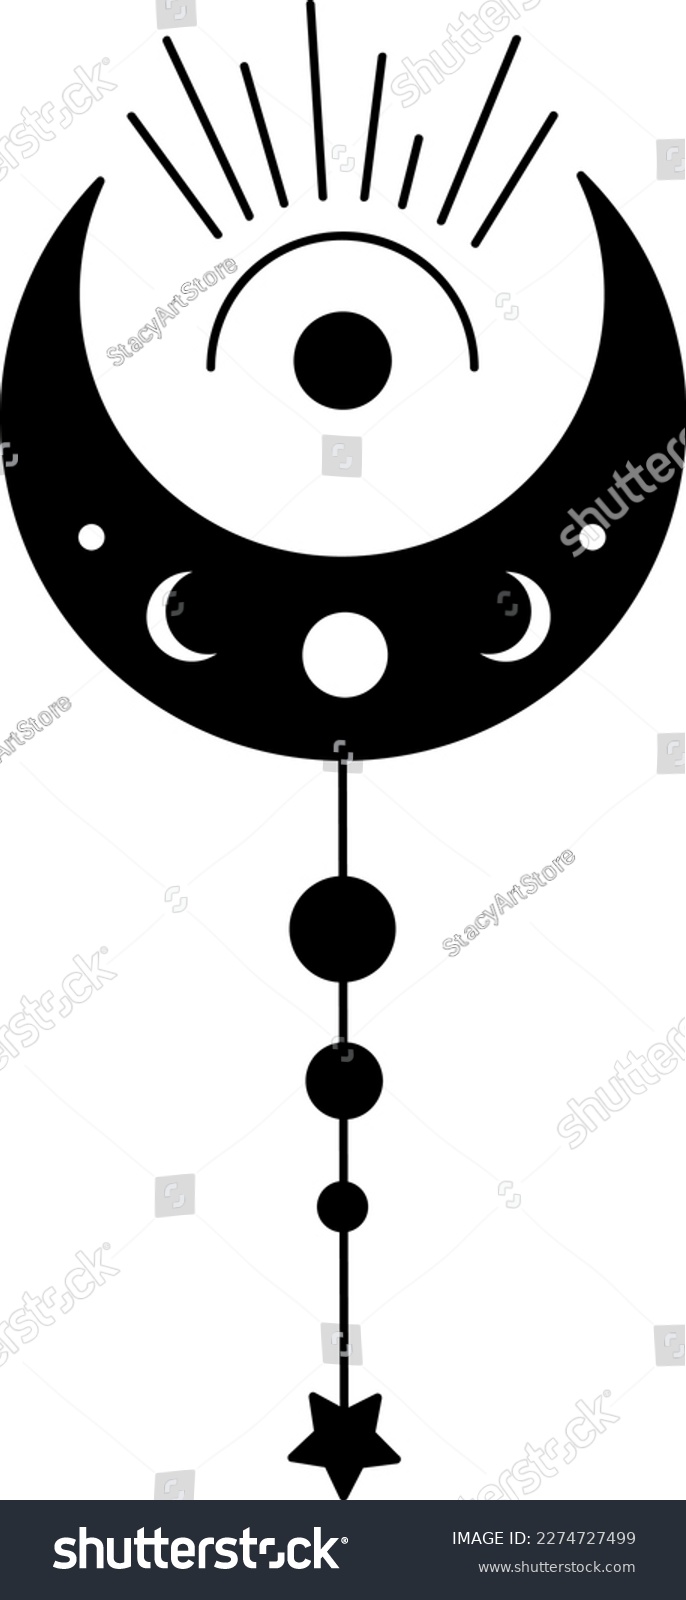 SVG of Bohemian Crescent Moon with Stars and Rays Astrology Illustration. Moon Phases SVG Vector Clipart. Celestial, Mystical, Esoteric designs perfect for Printing. T-shirt, Mugs Cut File. Universe Art svg